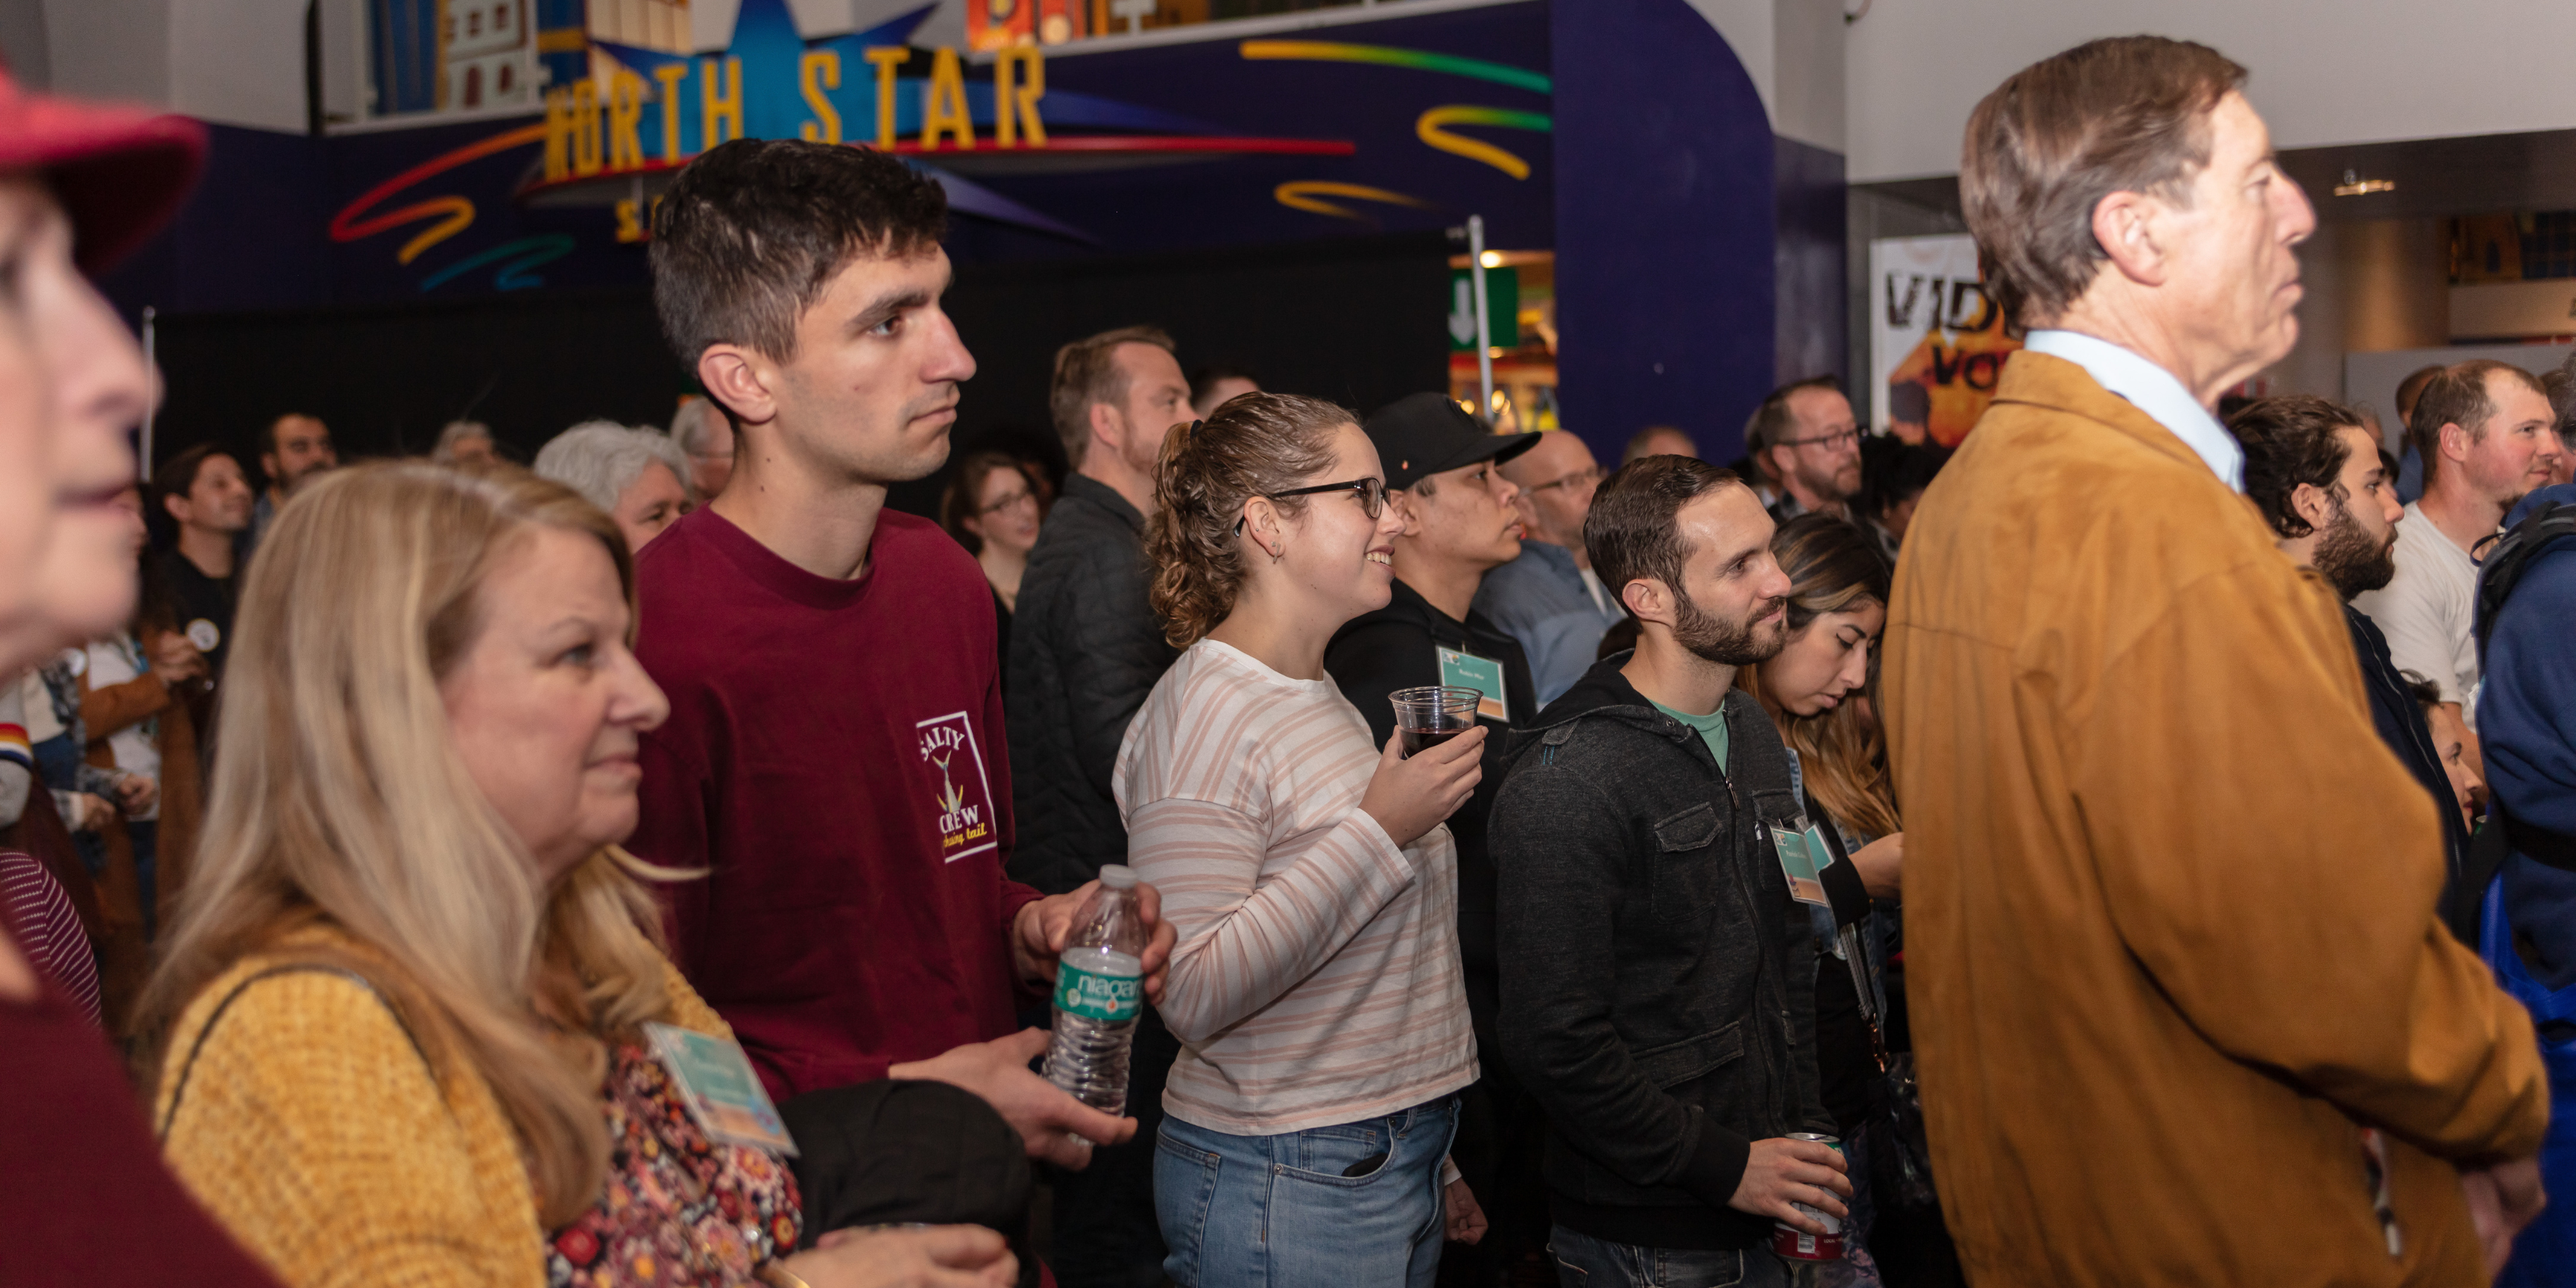 People gathered inside of the IMAX lobby of the Fleet Science Center with the North Star Science Store sign in the background.